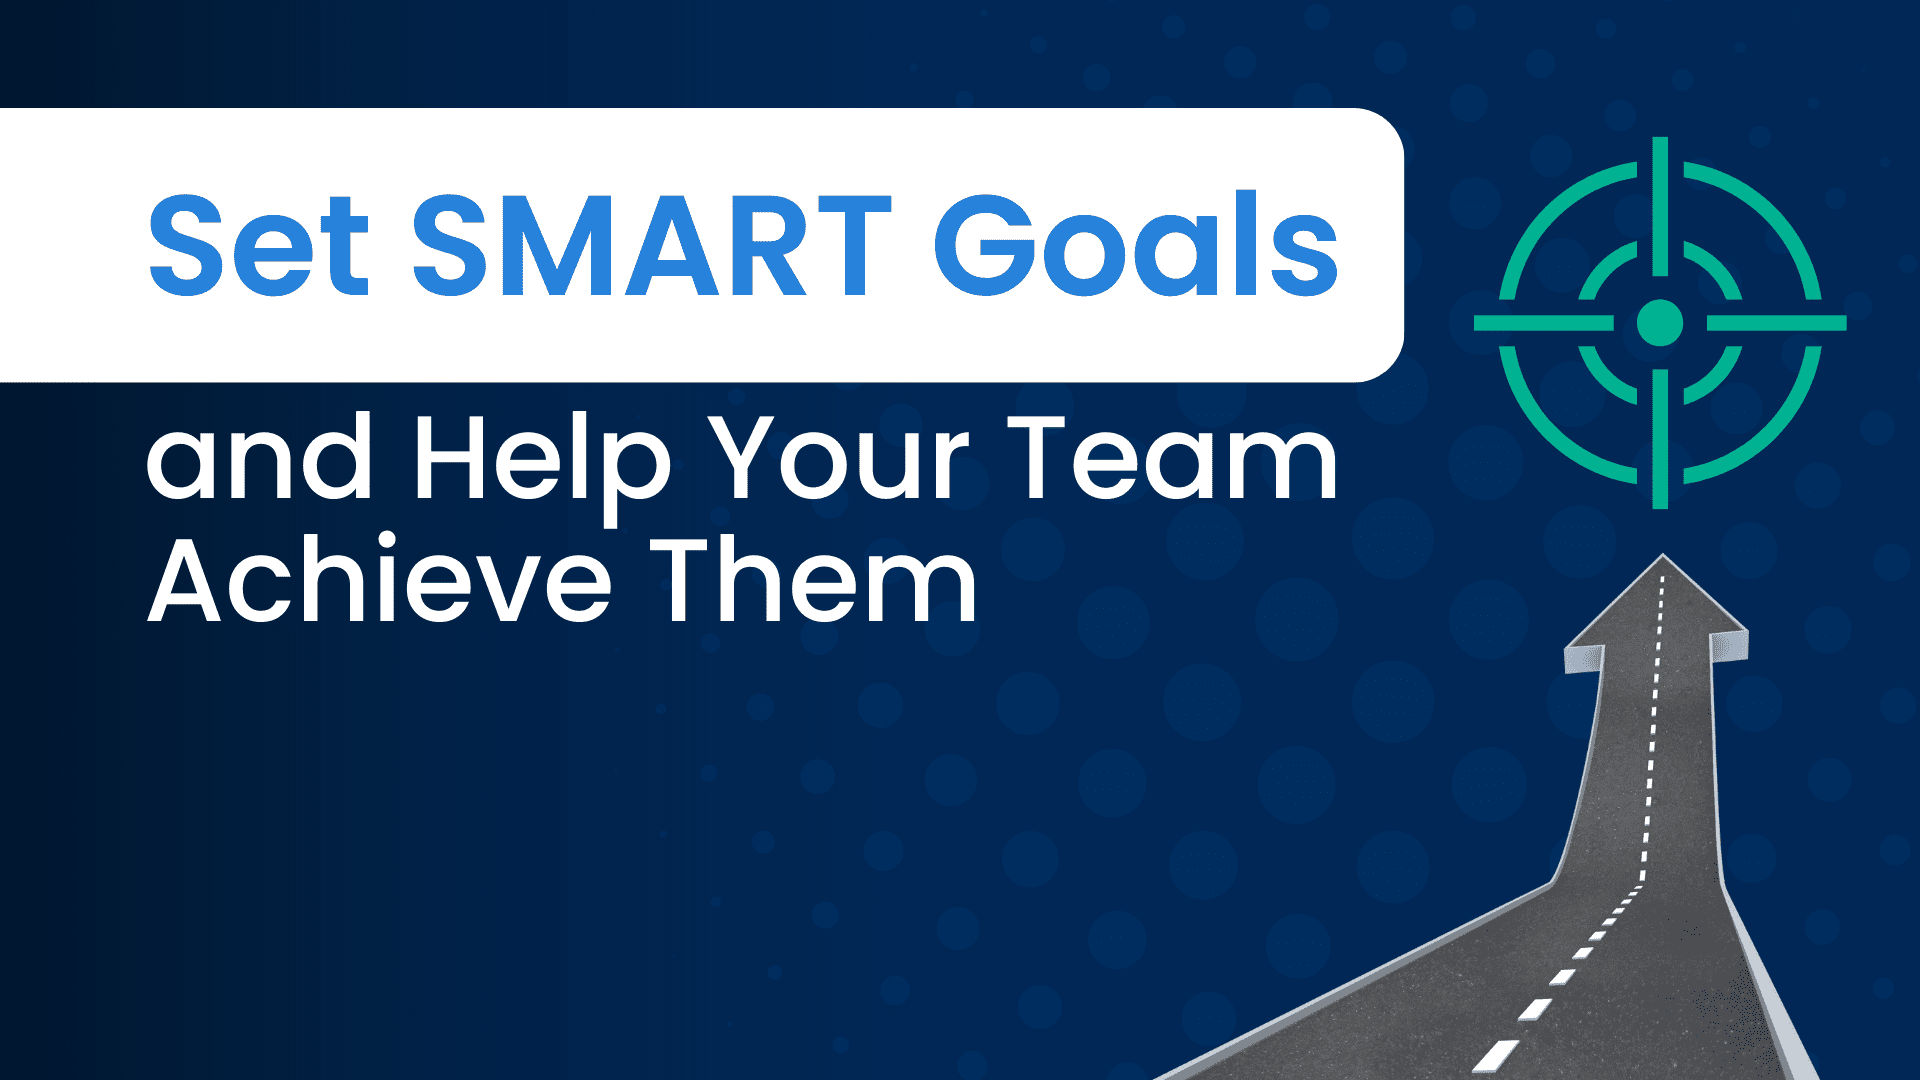 Photo text: Set Goals and Help Your Team Achieve Them